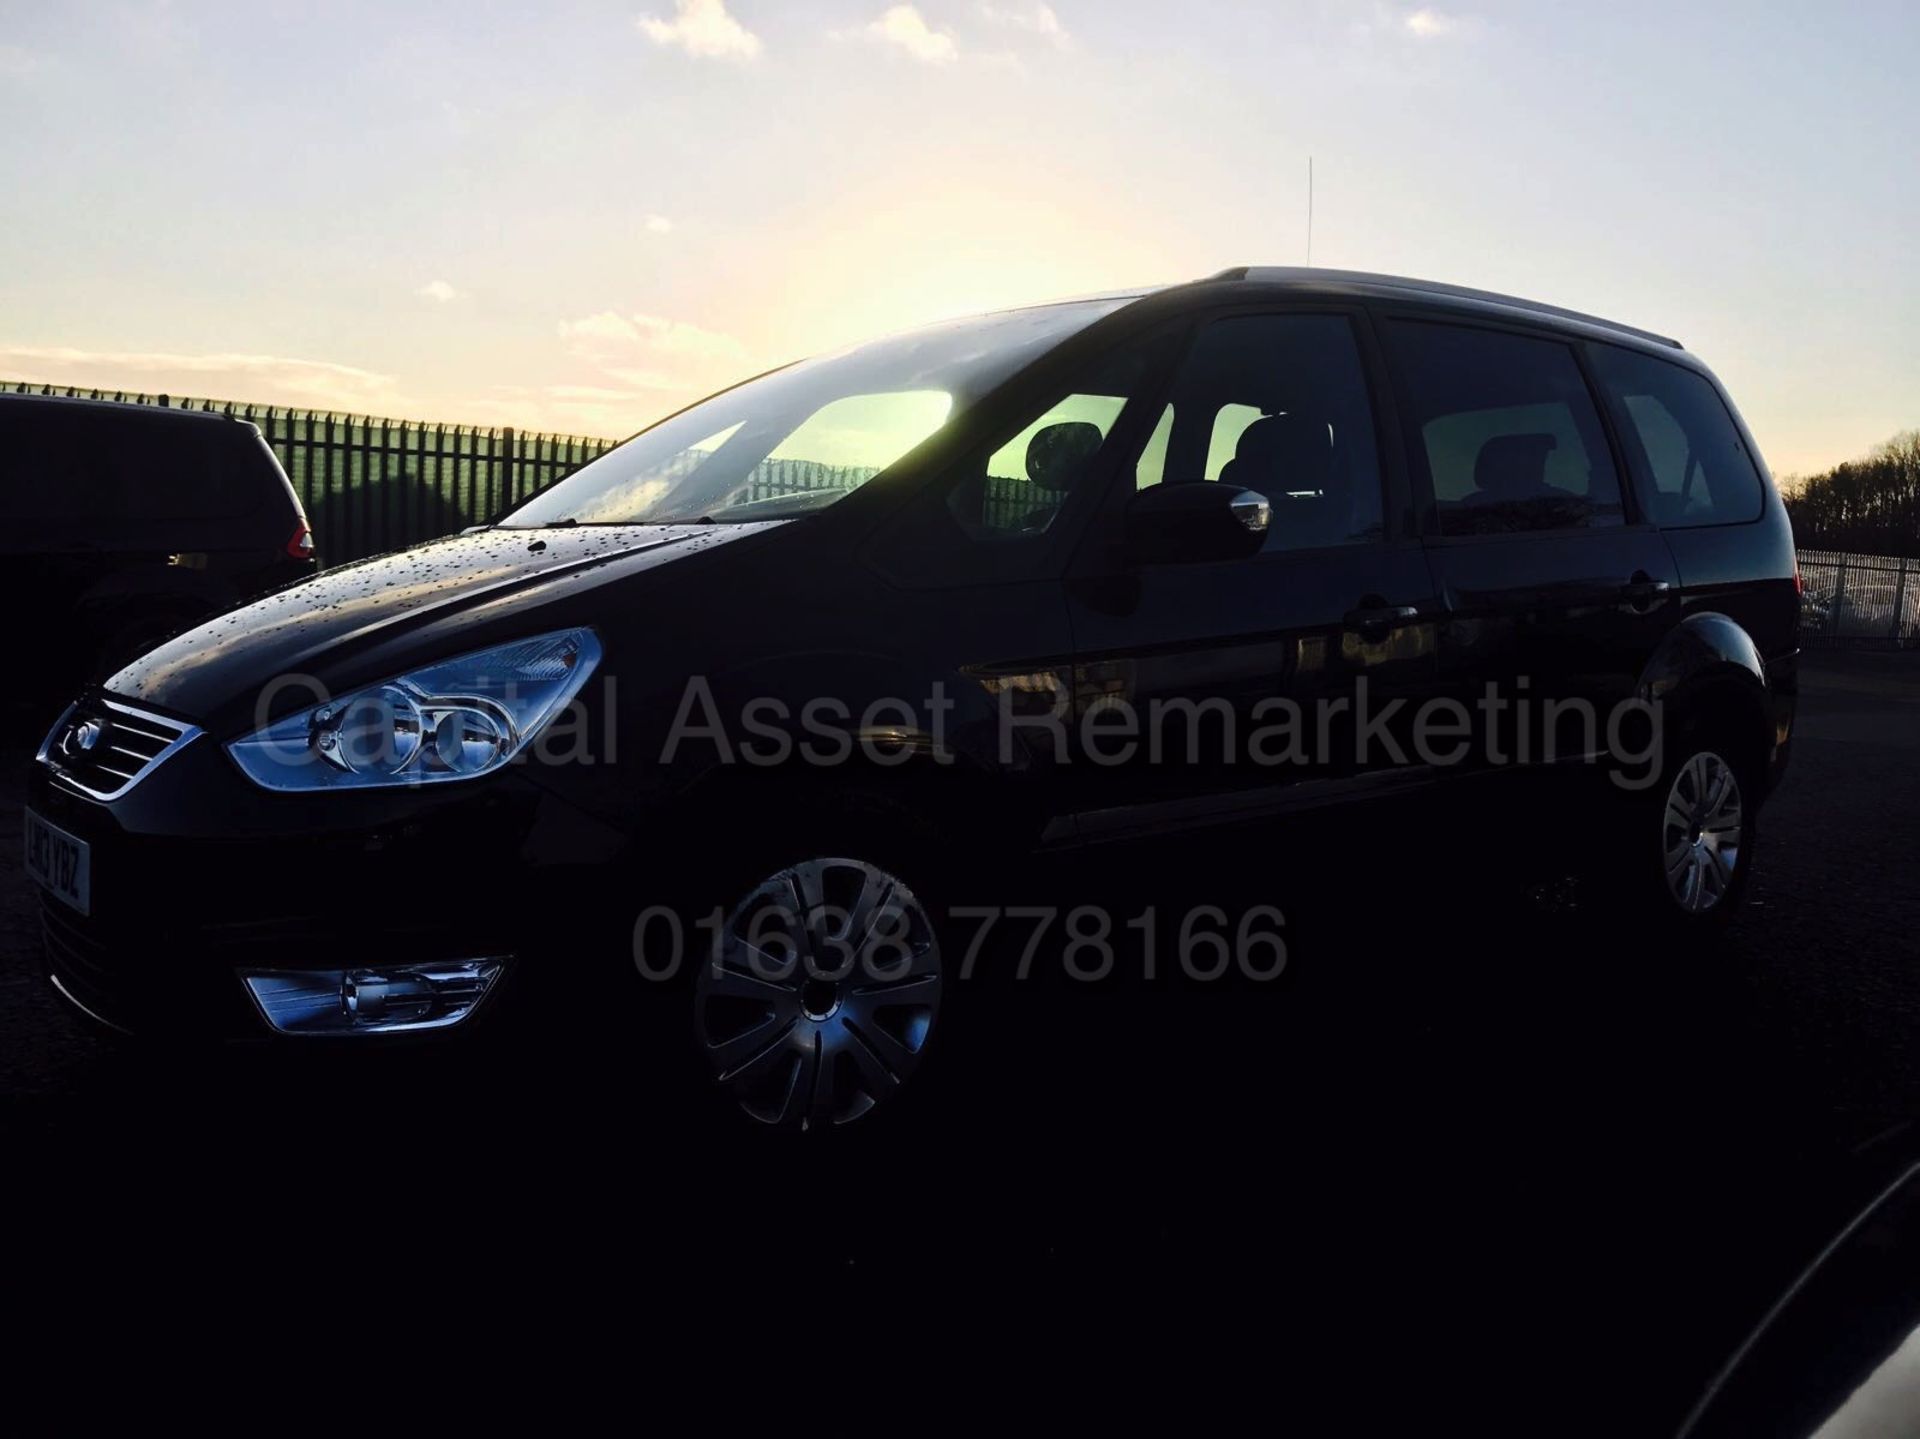 FORD GALAXY 'ZETEC' 7 SEATER (2013 - 13 REG) 2.0 TDCI - 140 BHP POWER SHIFT (1 OWNER) *FULL HISTORY* - Image 3 of 14